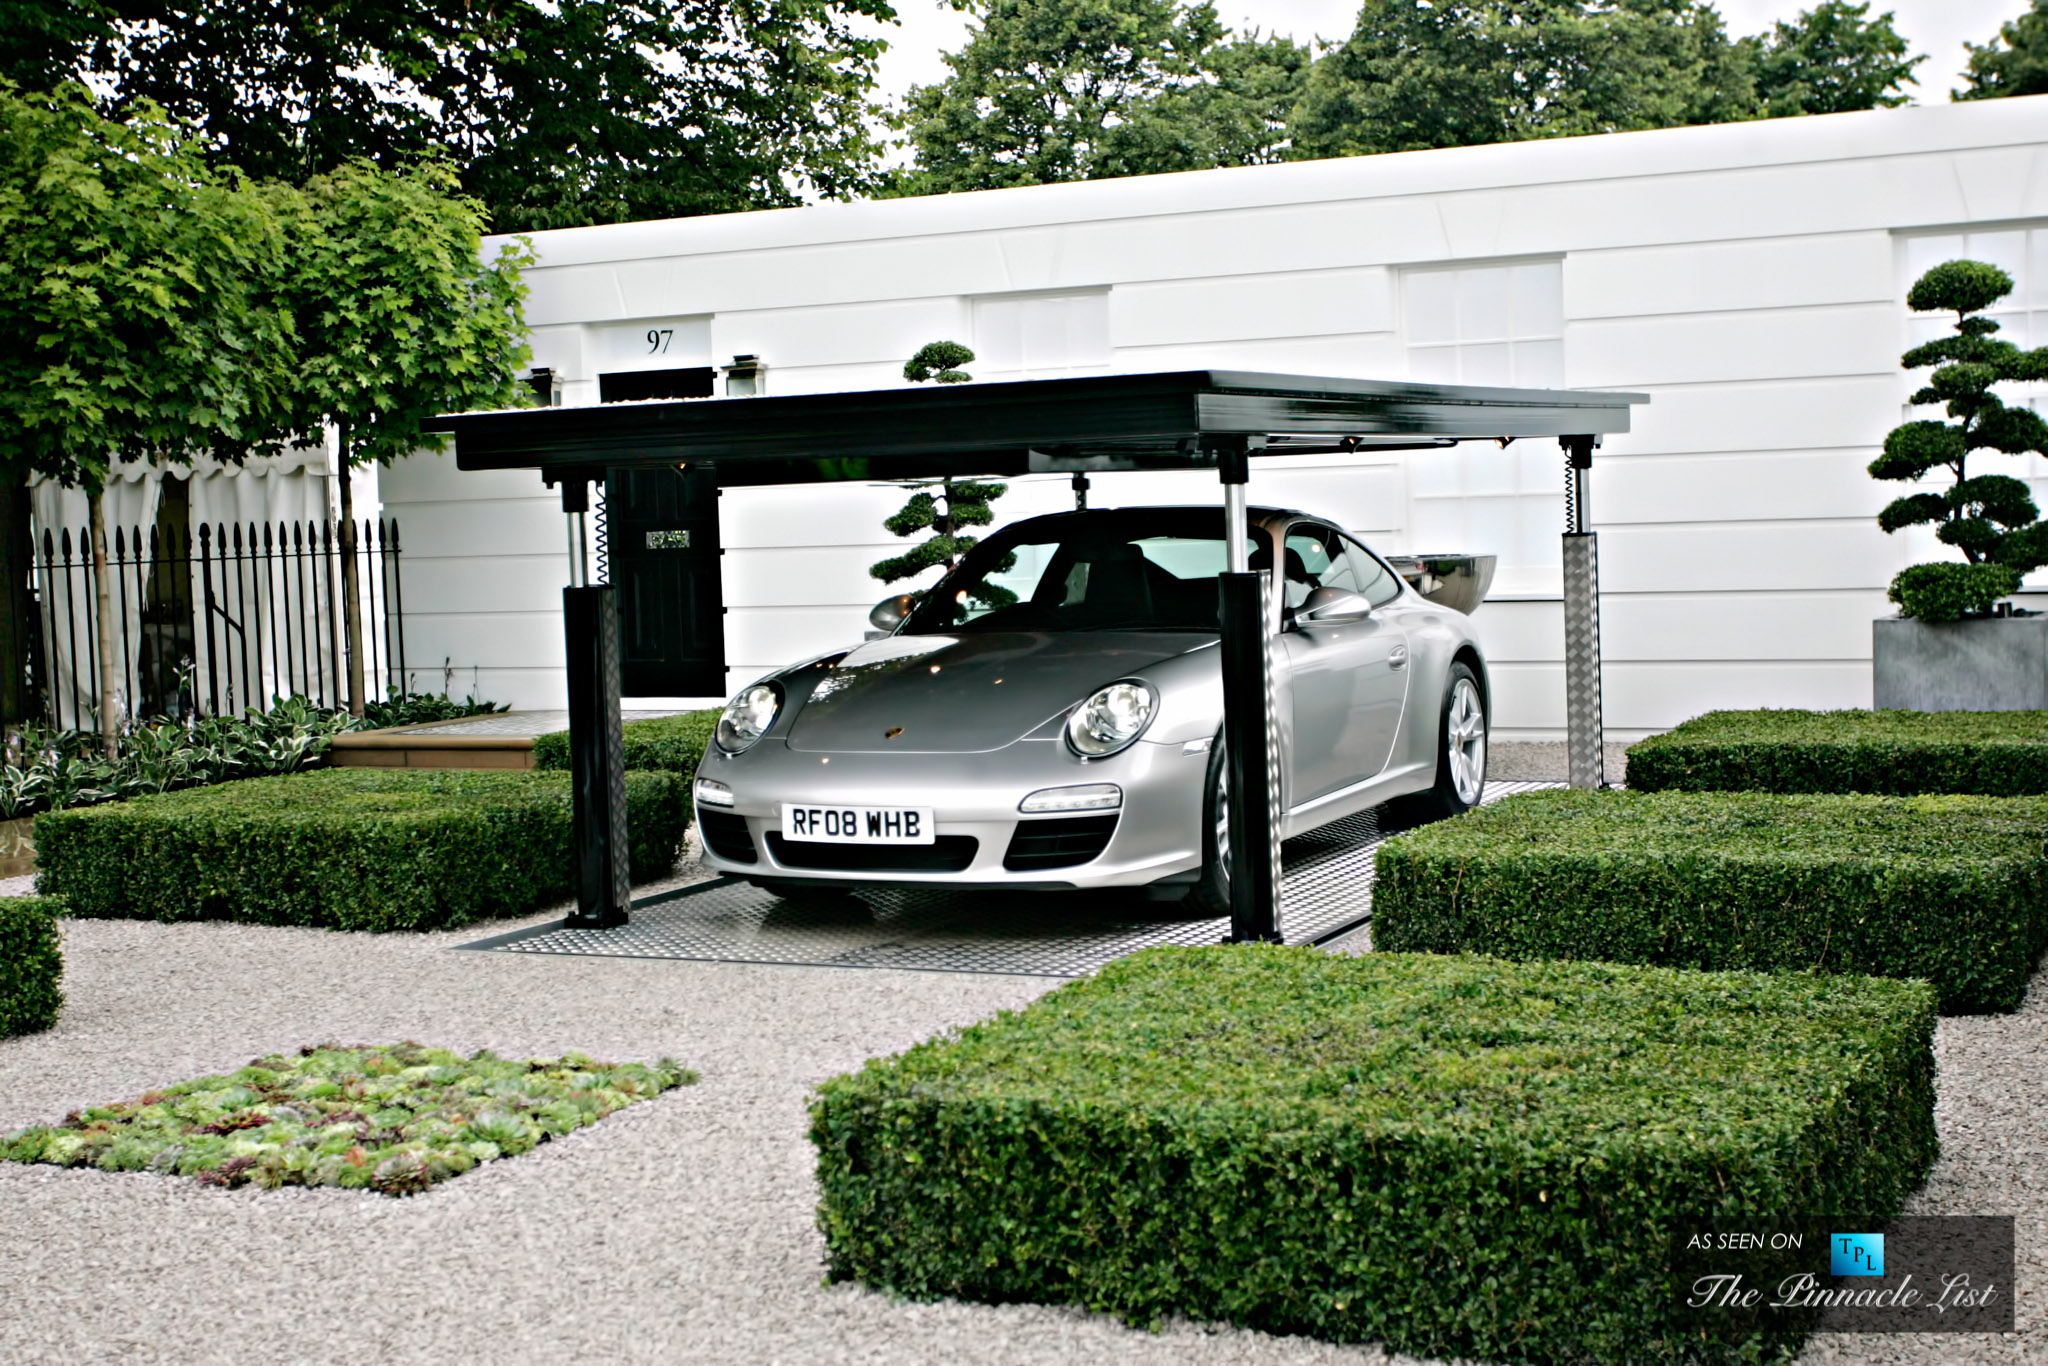 Cardok Underground Garage - The Ultimate Urban Solution for Secure Luxury Car Parking and Storage